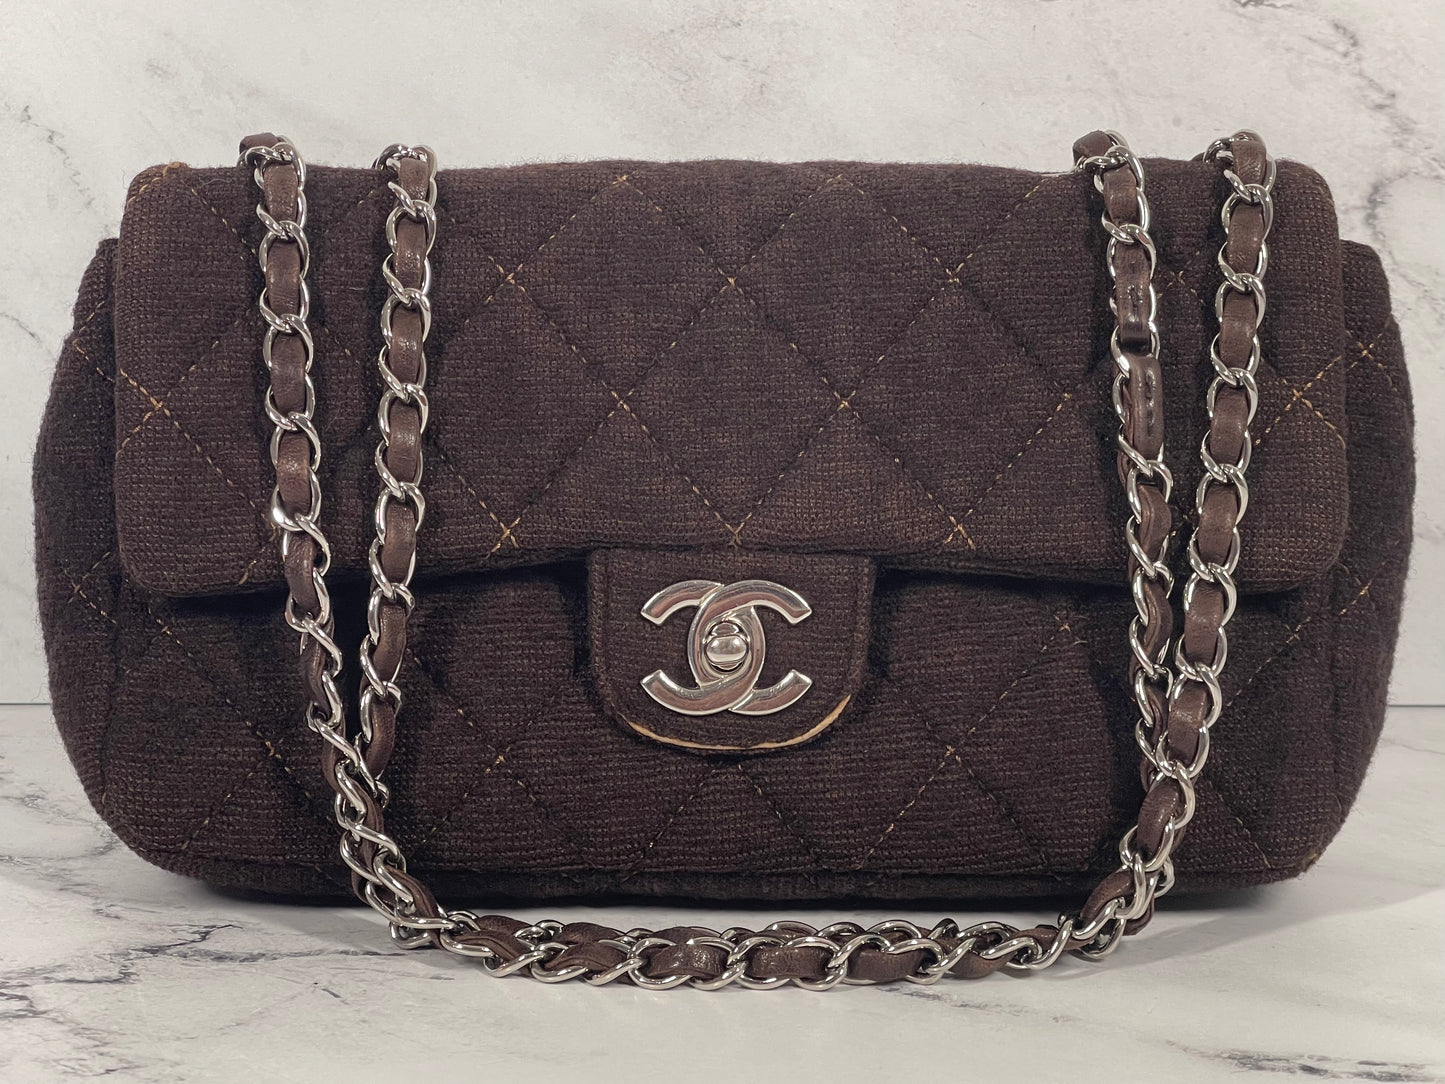 Chanel Vintage Brown Jersey Tweed Knit Fabric Quilted Medium Single Flap Bag